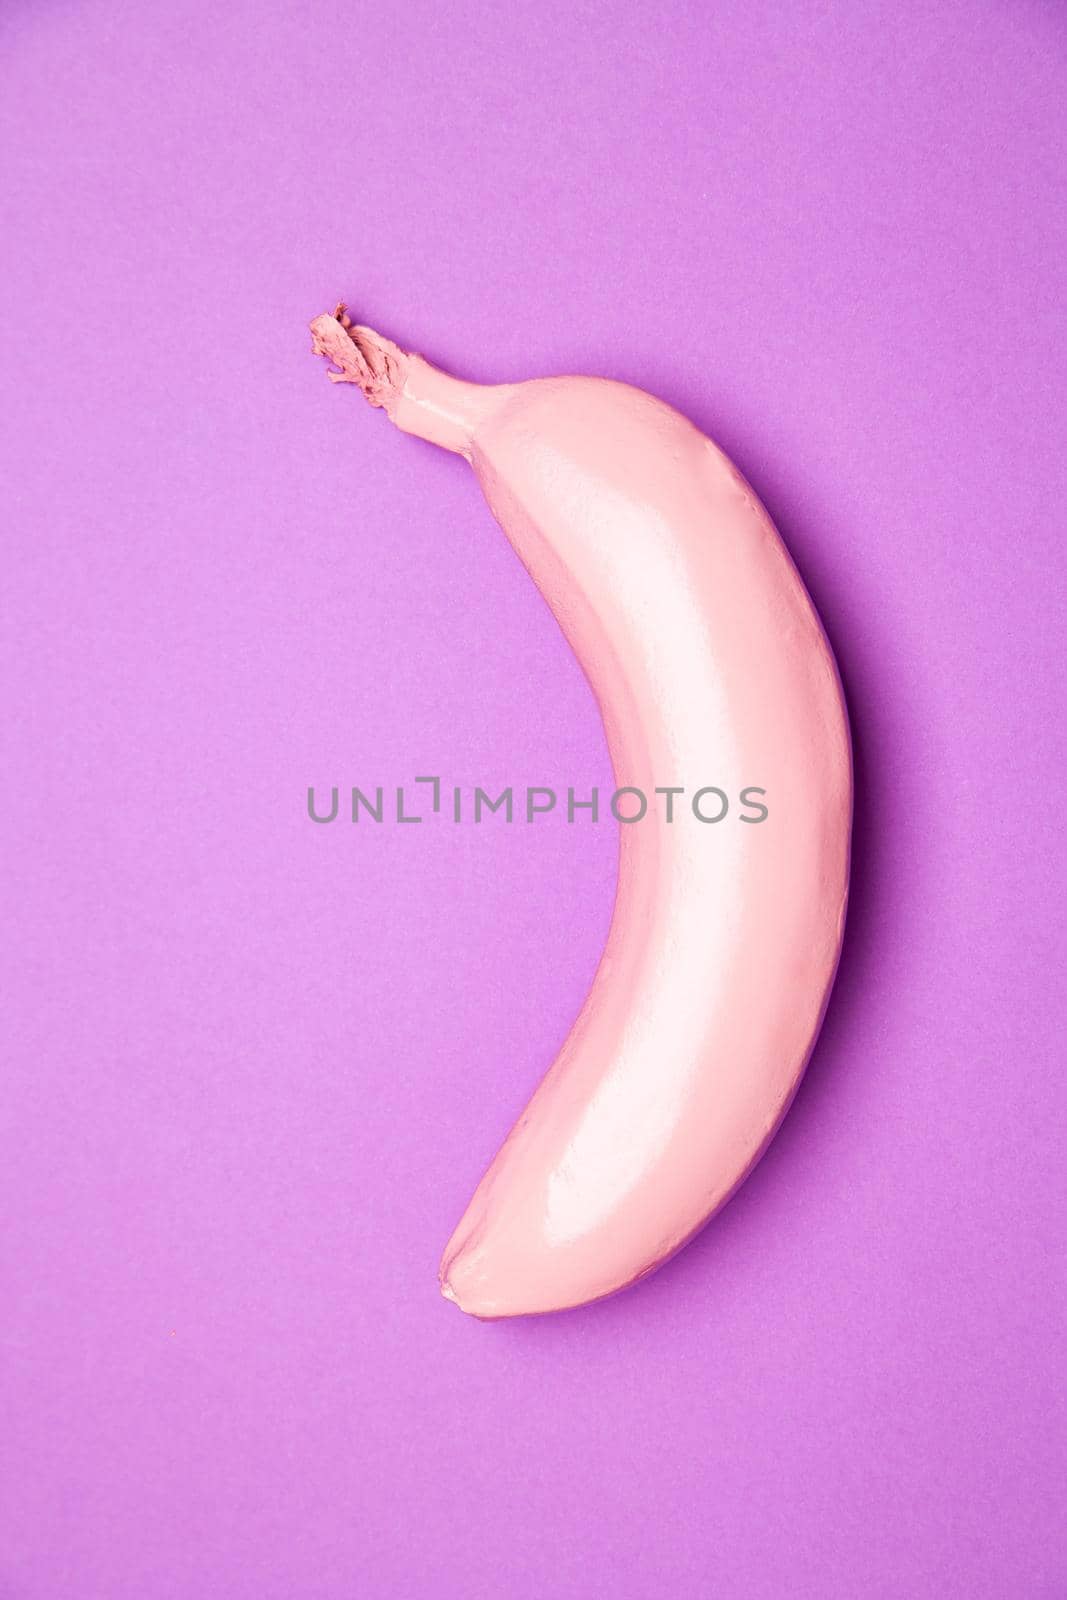 Top view of pink colored ripe fresh sweet banana placed on purple background